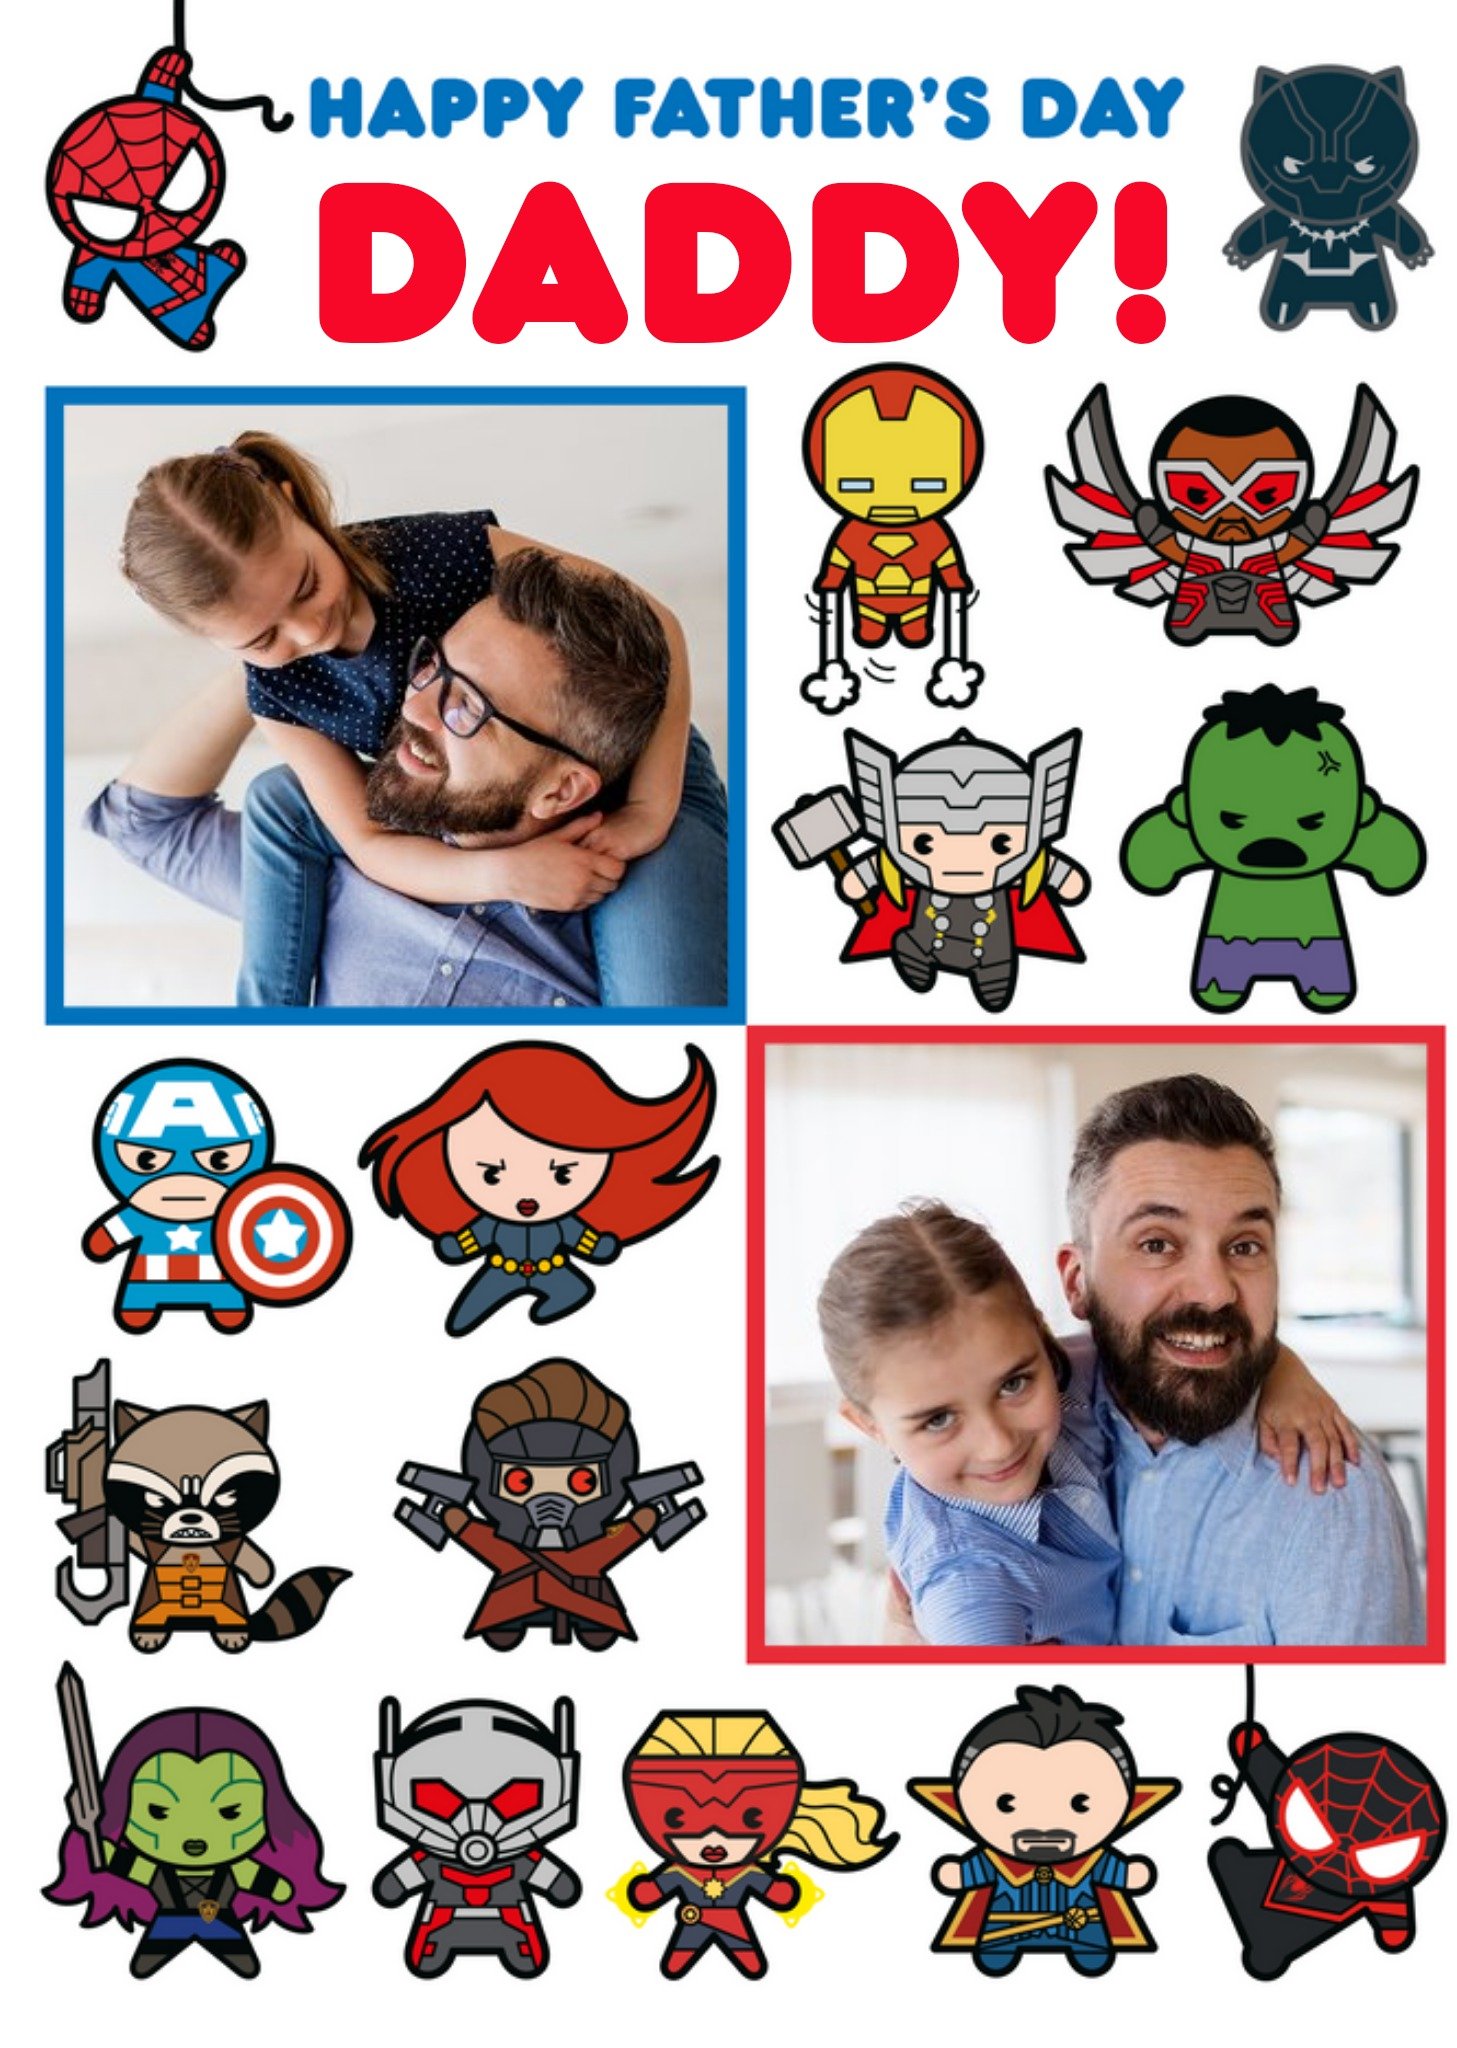 Disney Marvel Comics Heroes Photo Upload Father's Day Card Ecard